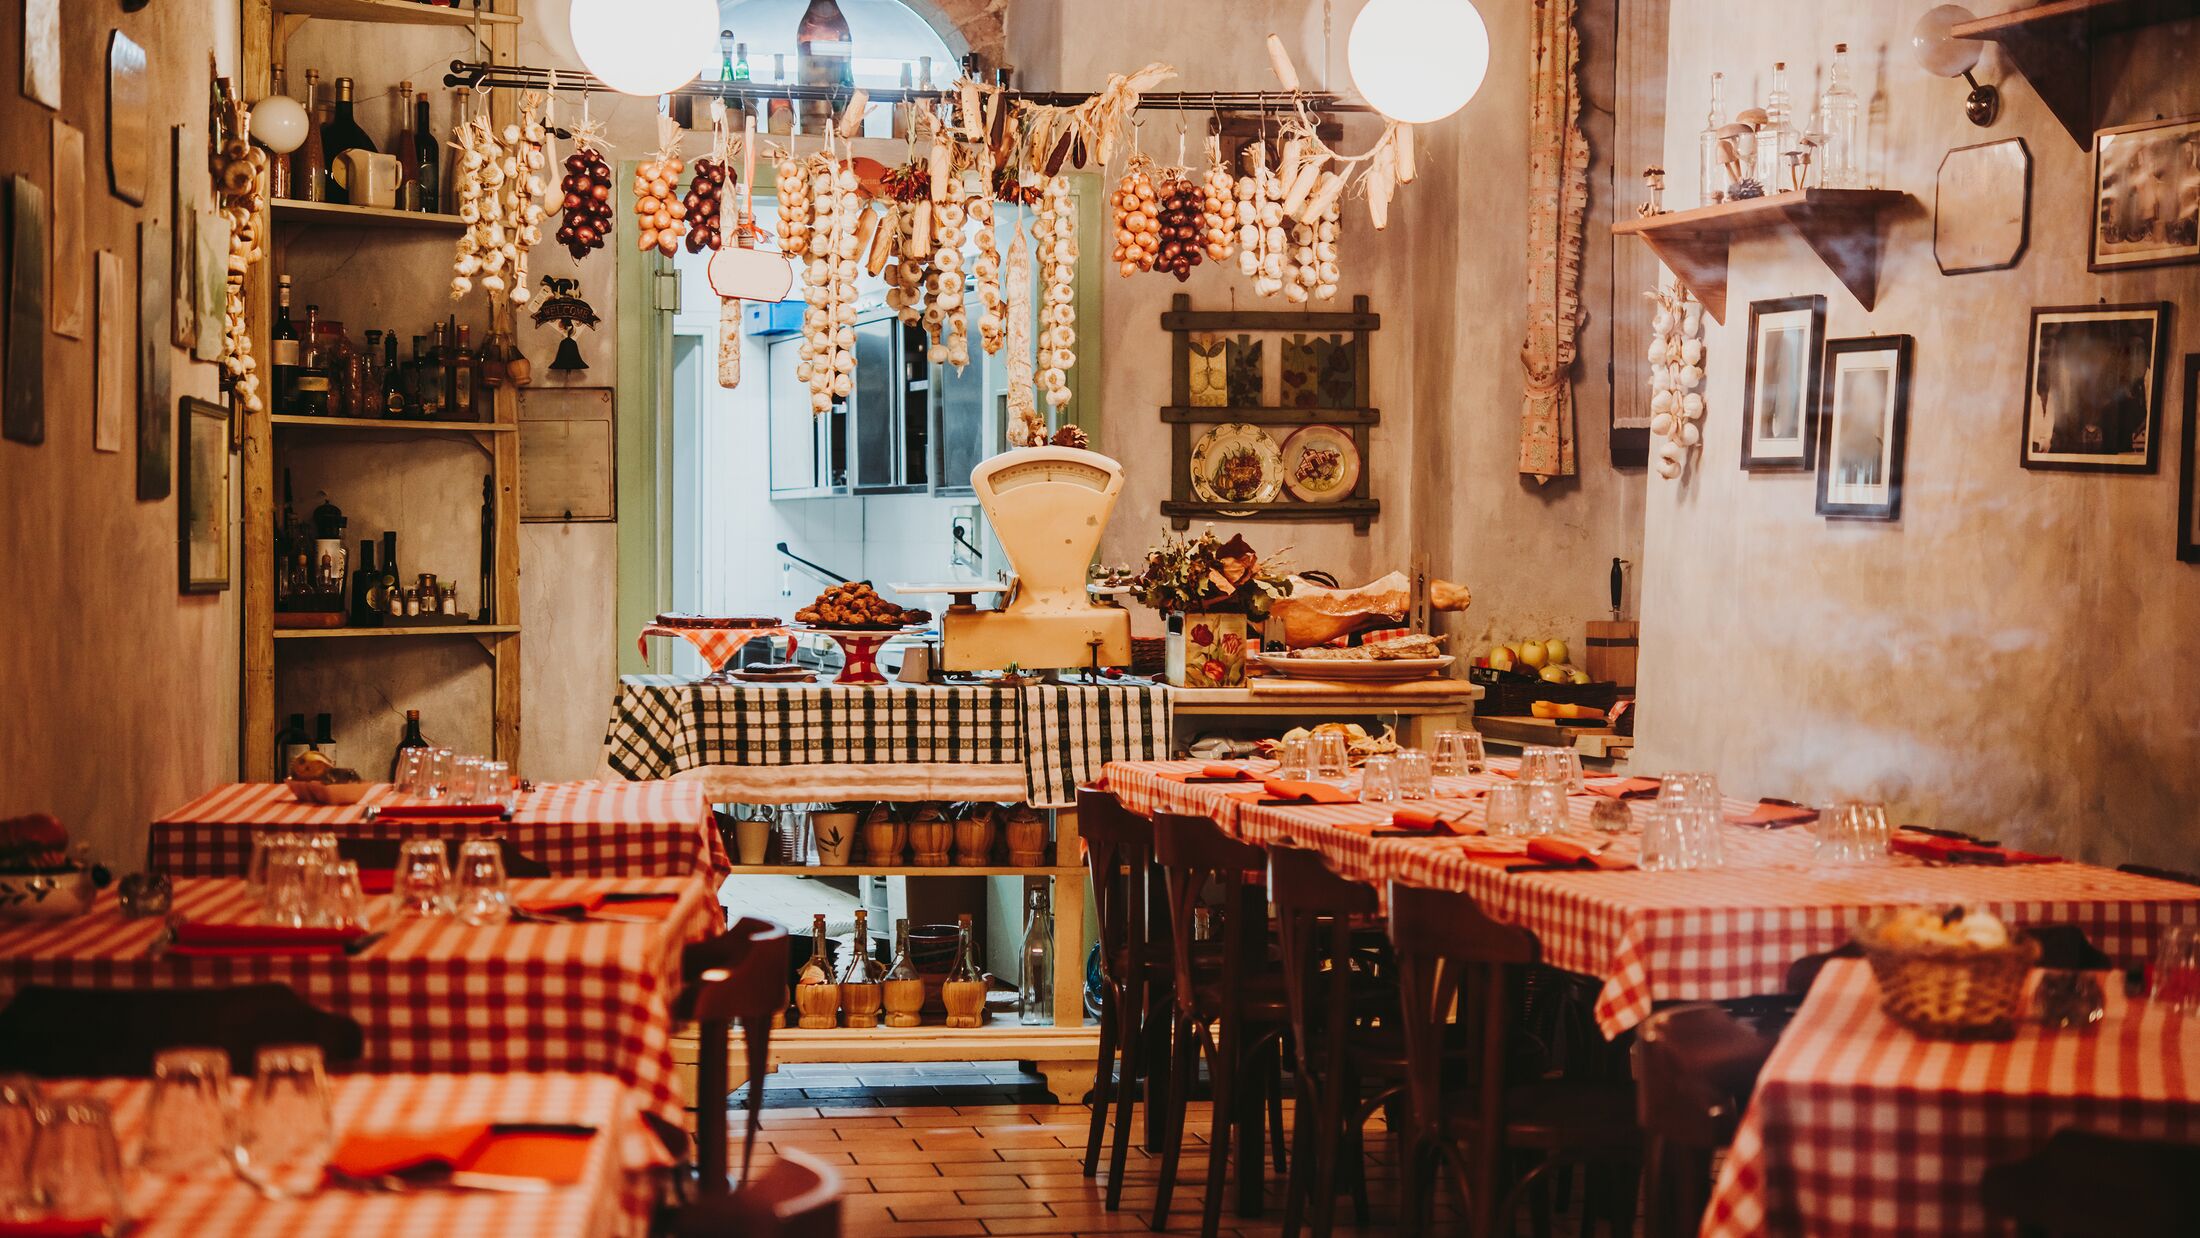 View of a small local restaurant or trattoria in Italy